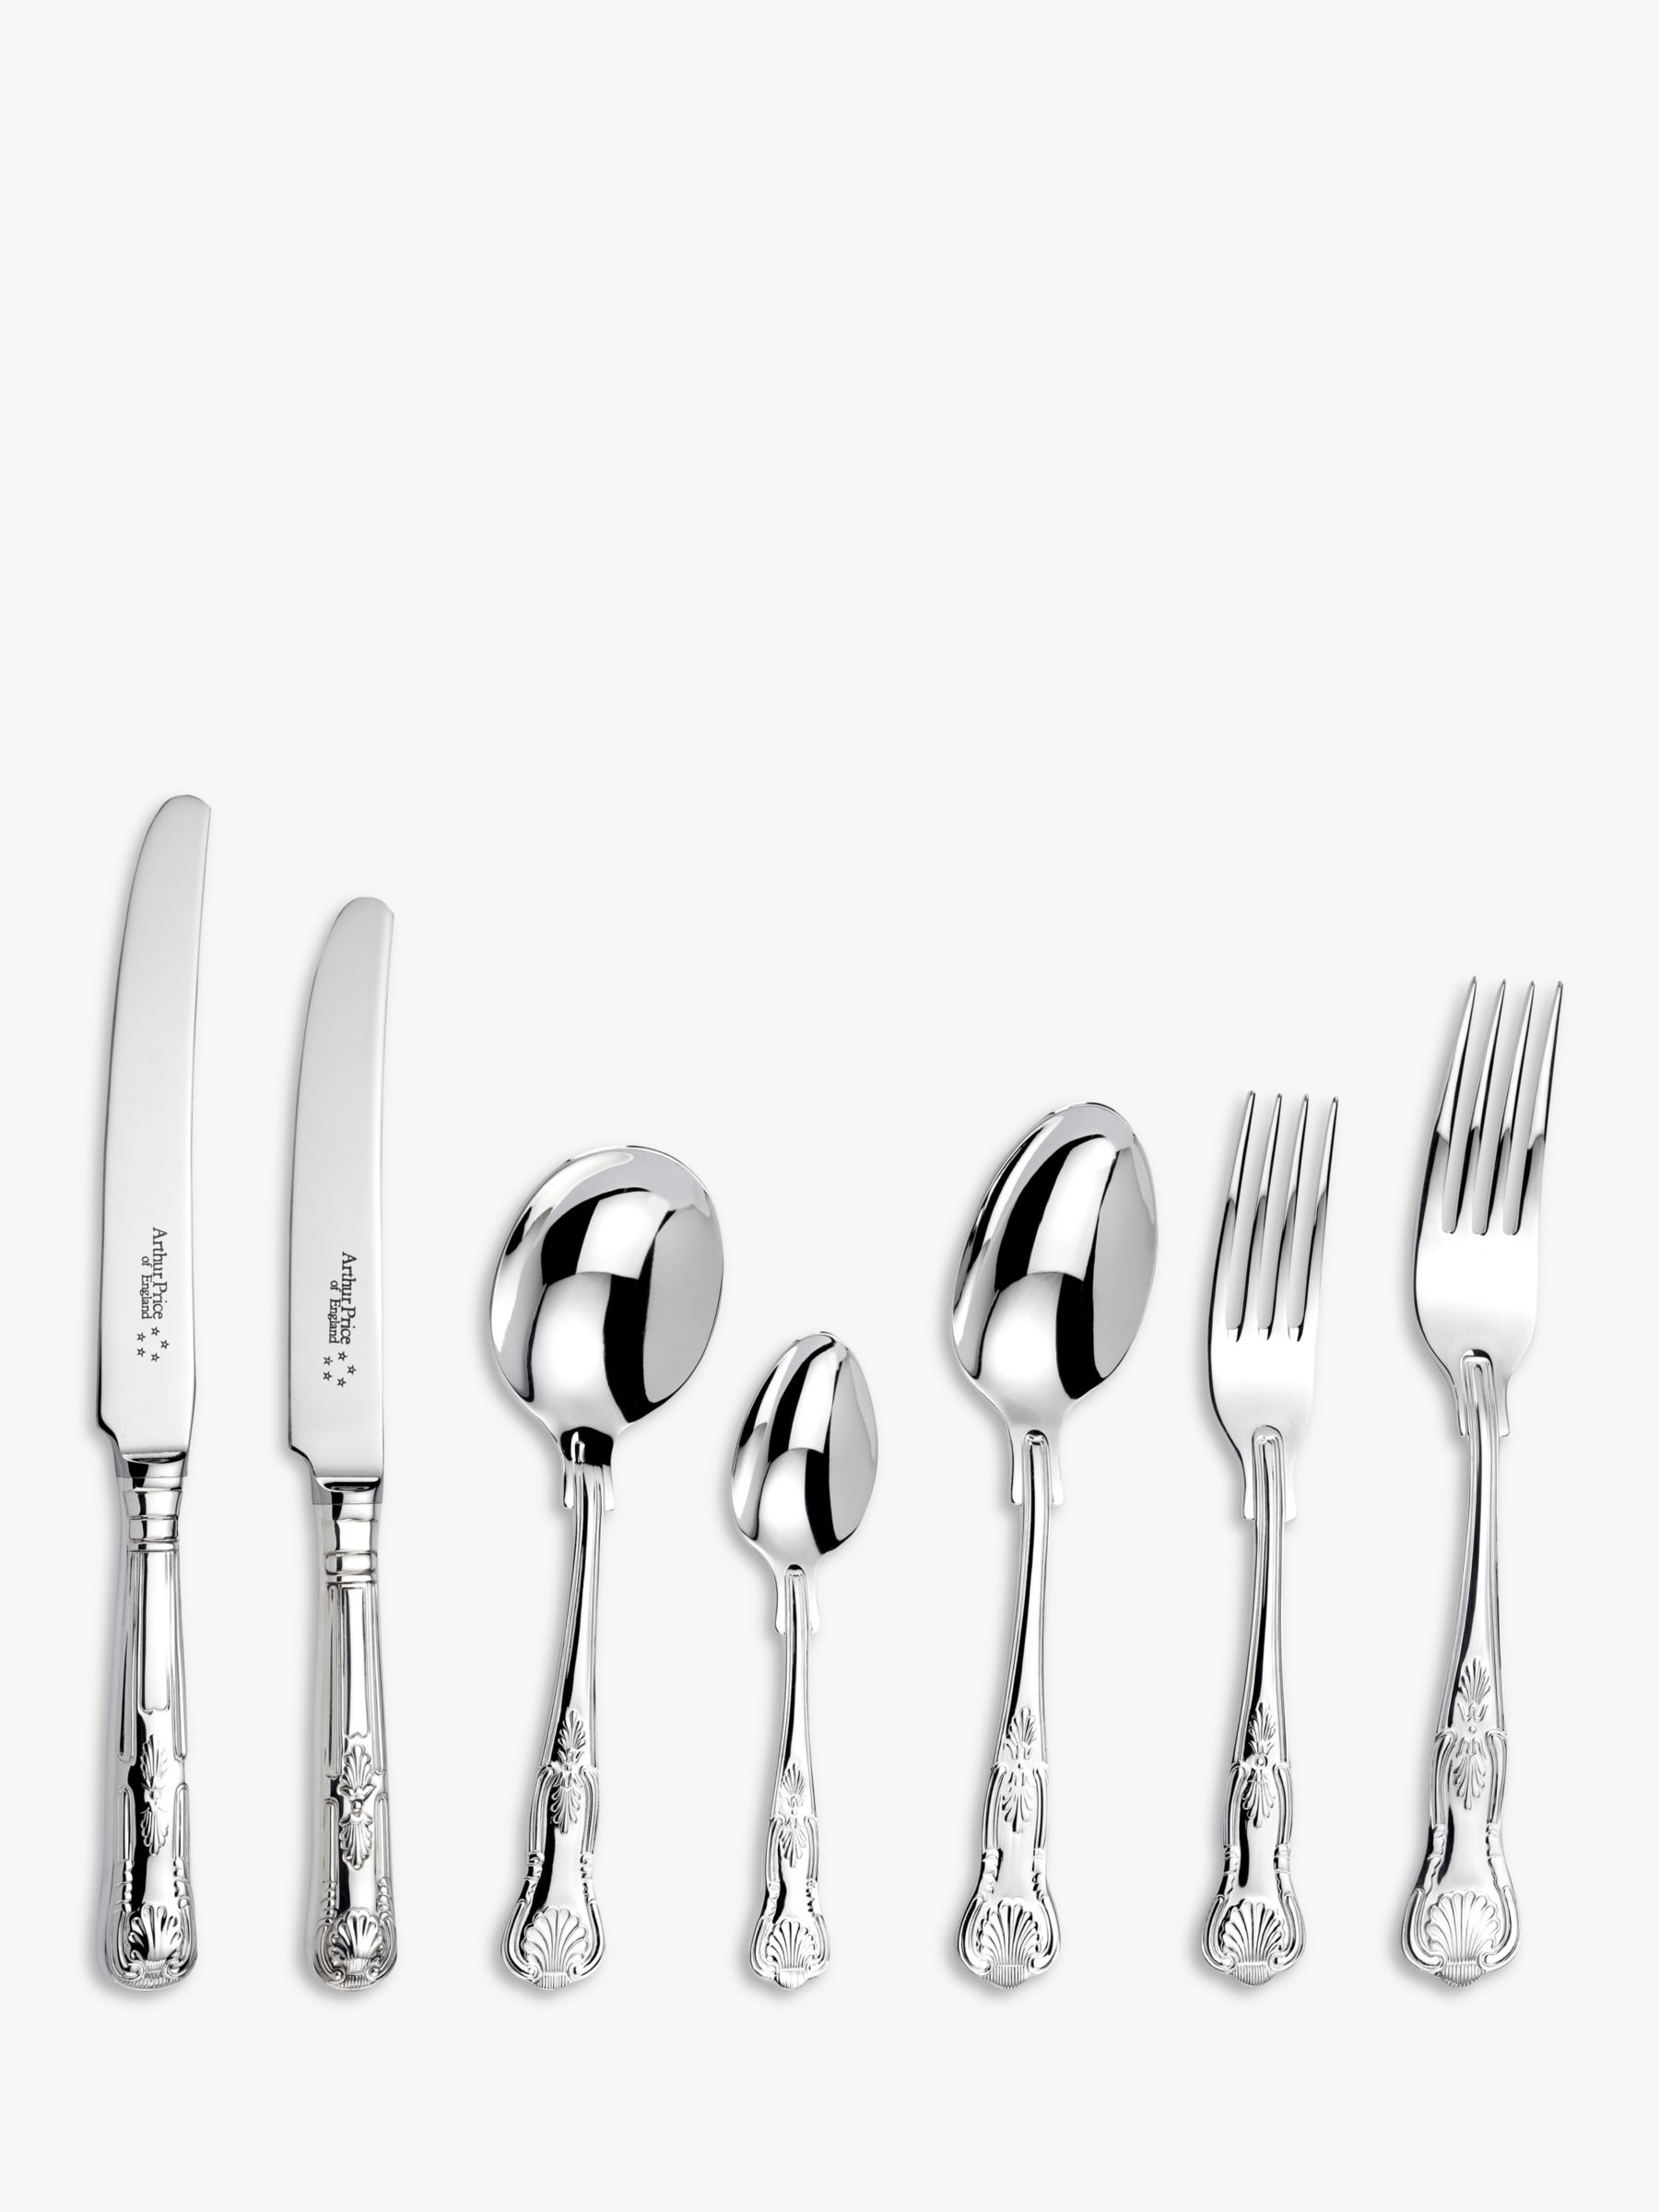 Arthur Price Kings Cutlery Canteen, Sovereign Silver Plated, 124 Piece/12 Place Settings